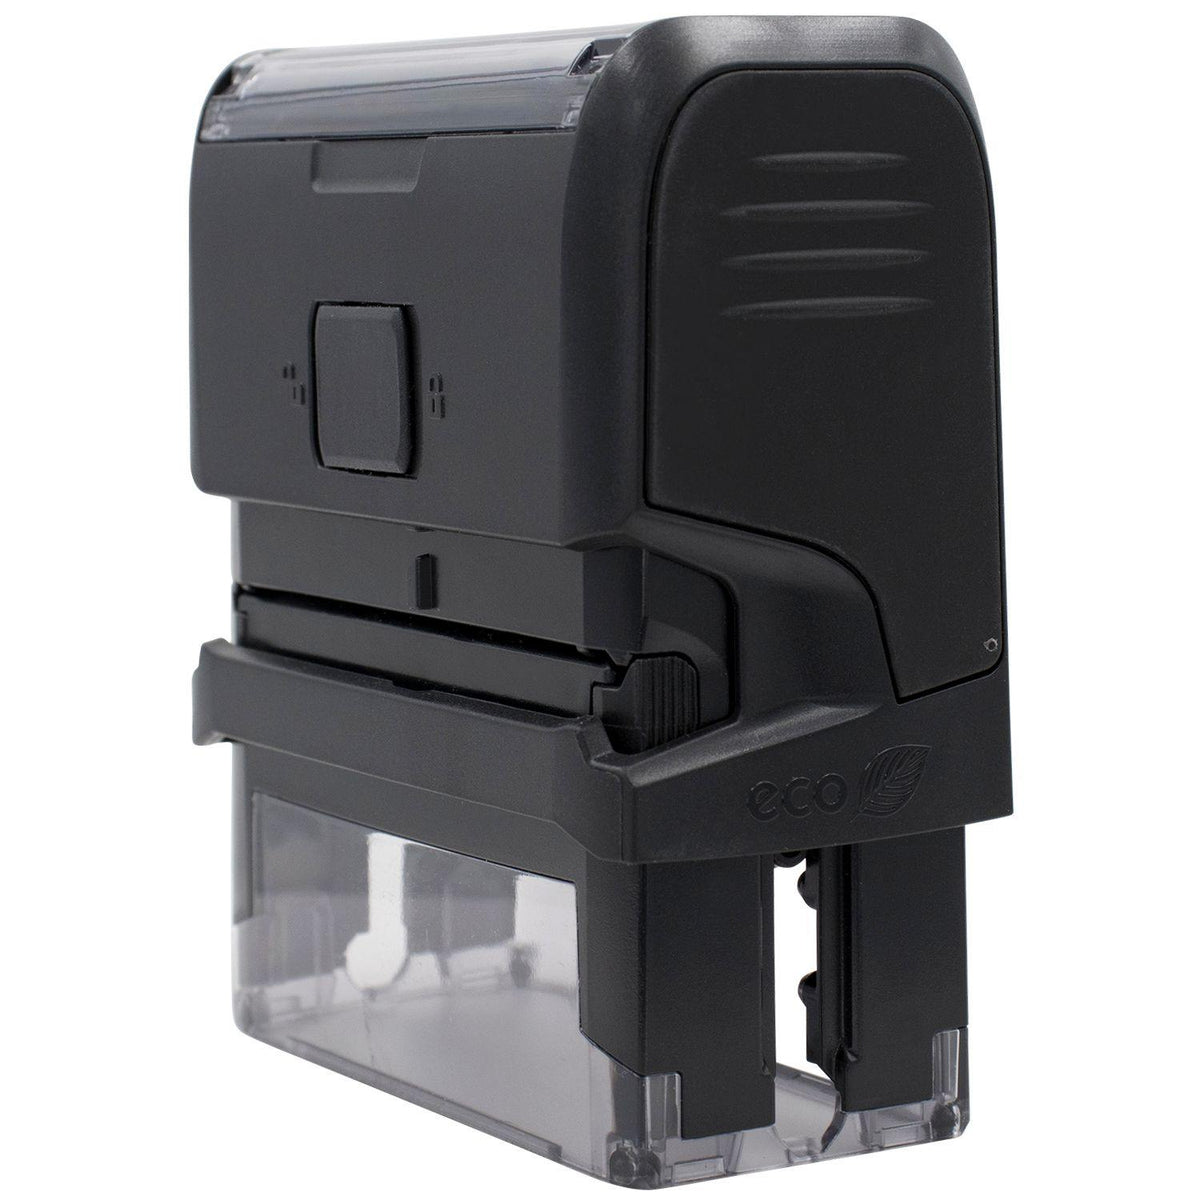 Large Self-Inking Small Packet Stamp - Engineer Seal Stamps - Brand_Trodat, Impression Size_Large, Stamp Type_Self-Inking Stamp, Type of Use_Office, Type of Use_Postal &amp; Mailing